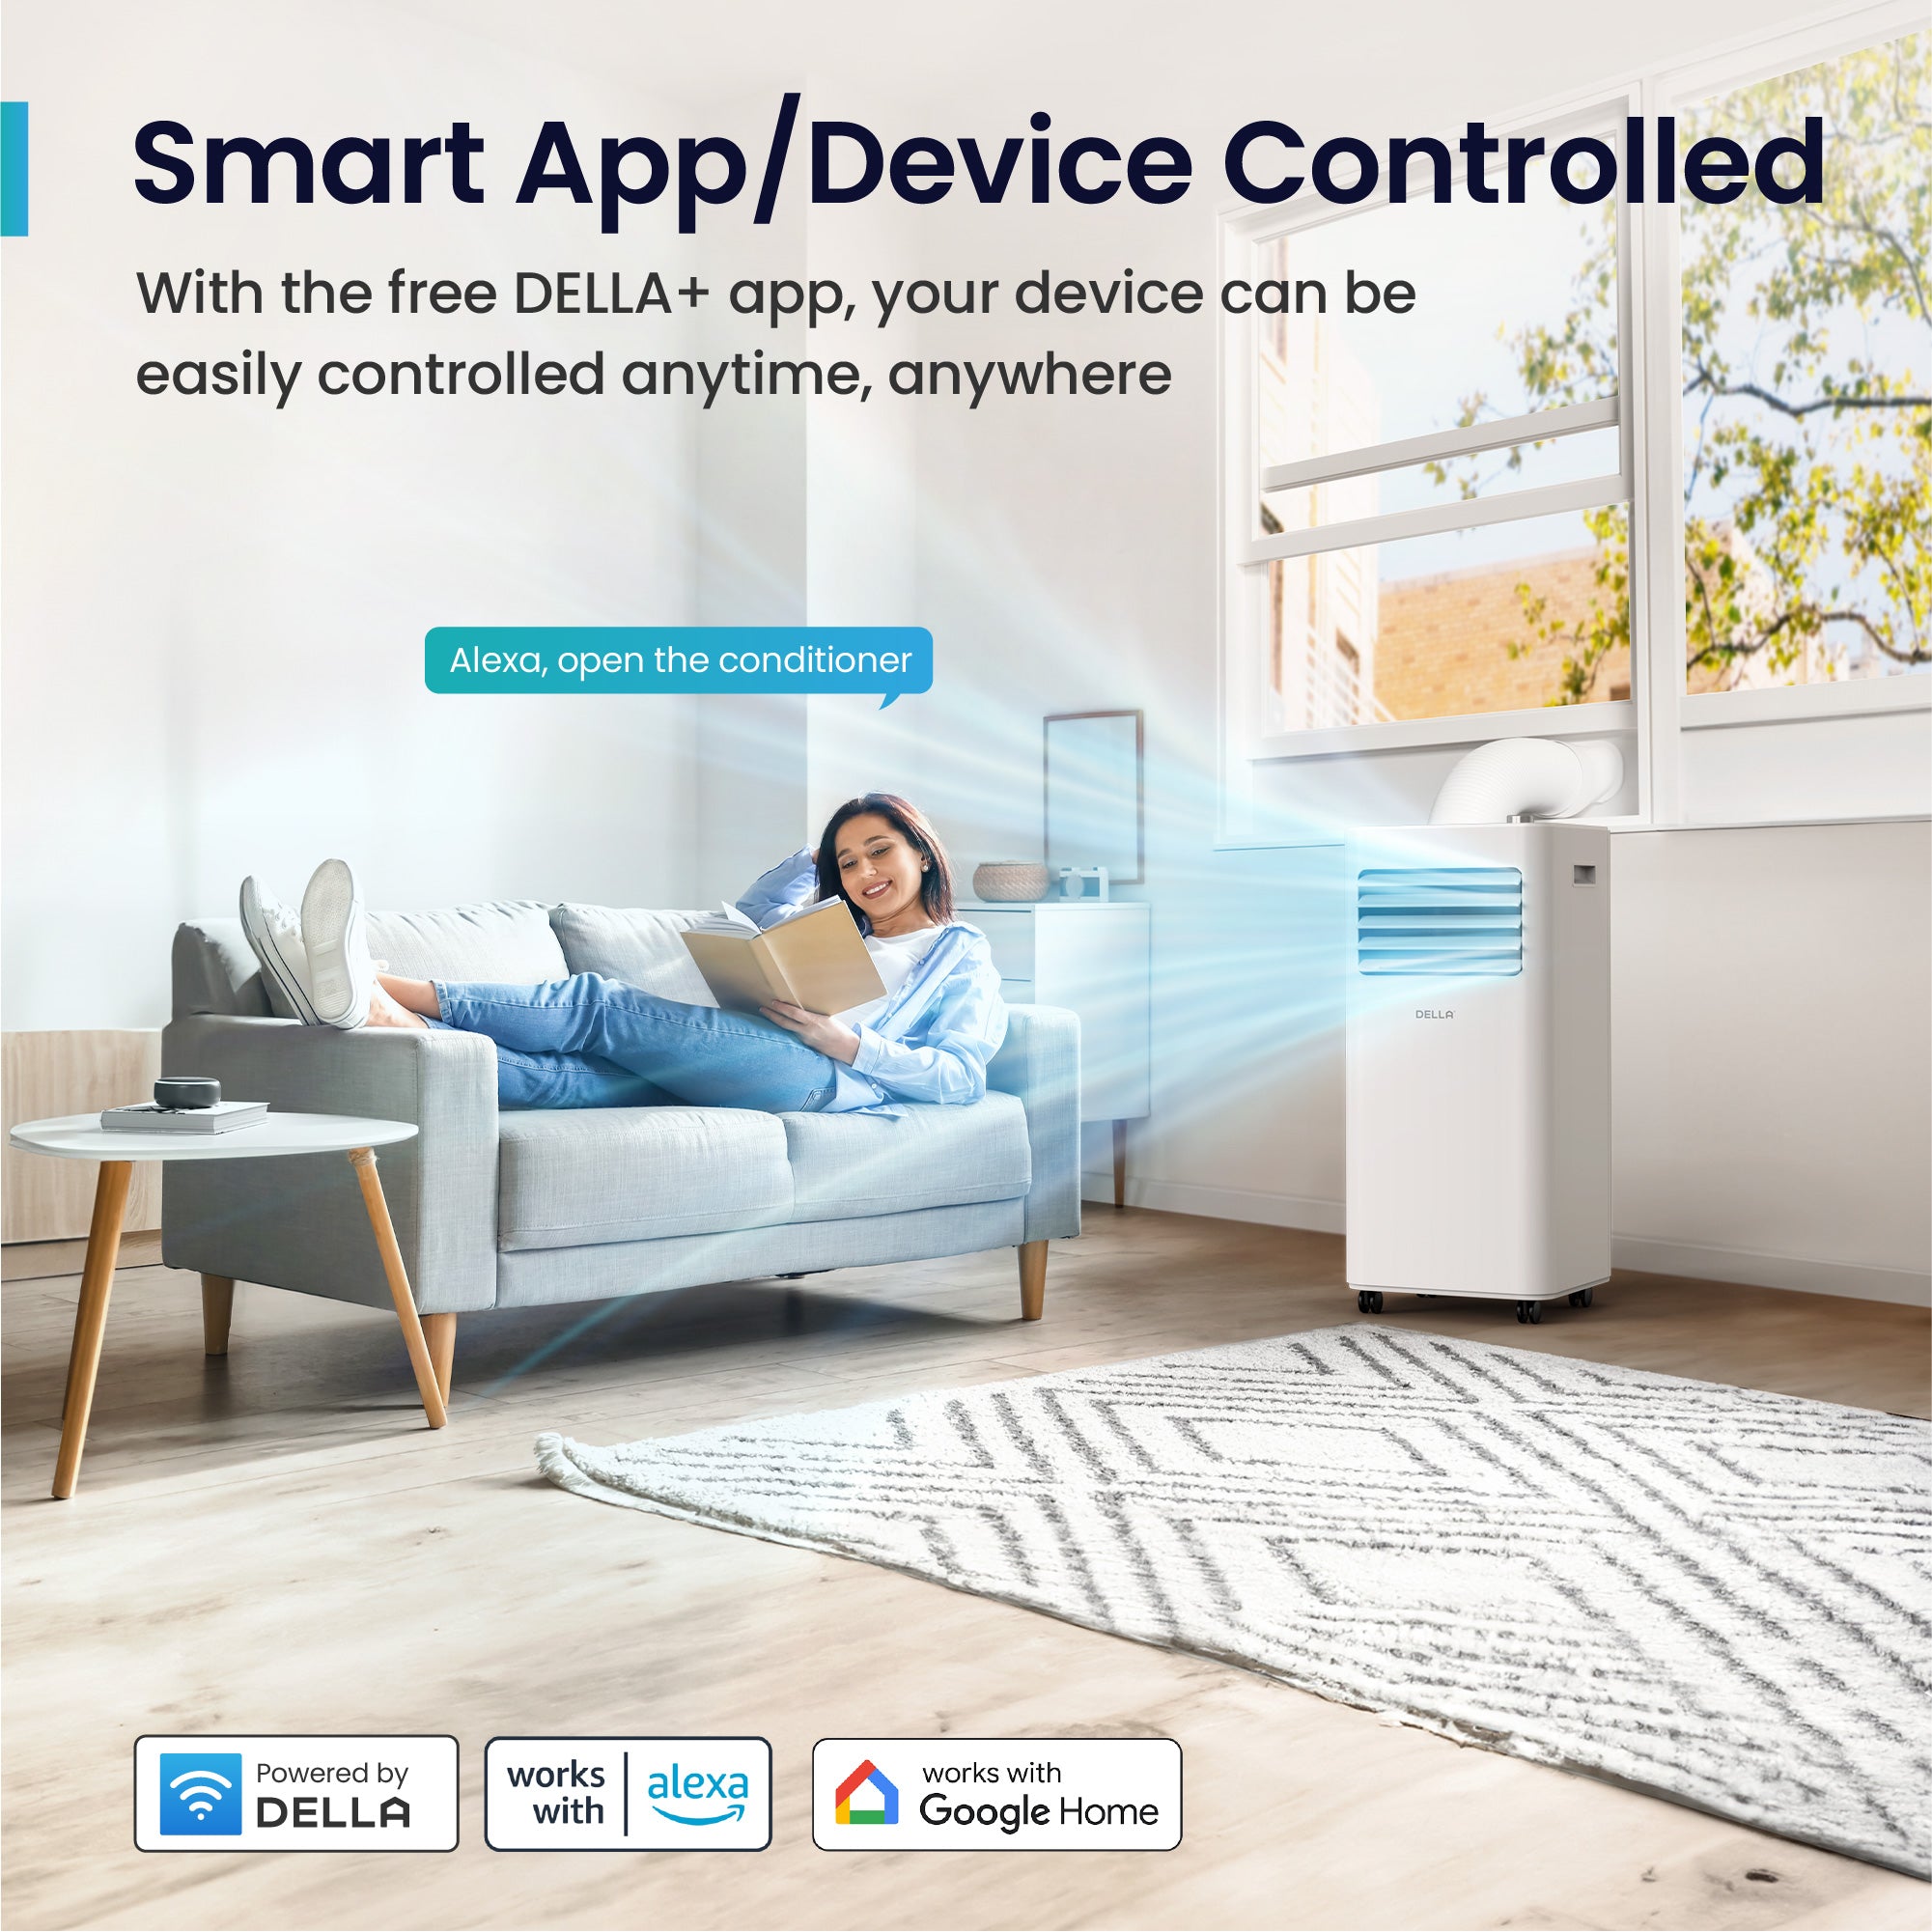 8000 BTU Smart WiFi Enabled Portable AC with Heat/Remote/App Control, Cools Up To 350 Sq. Ft.